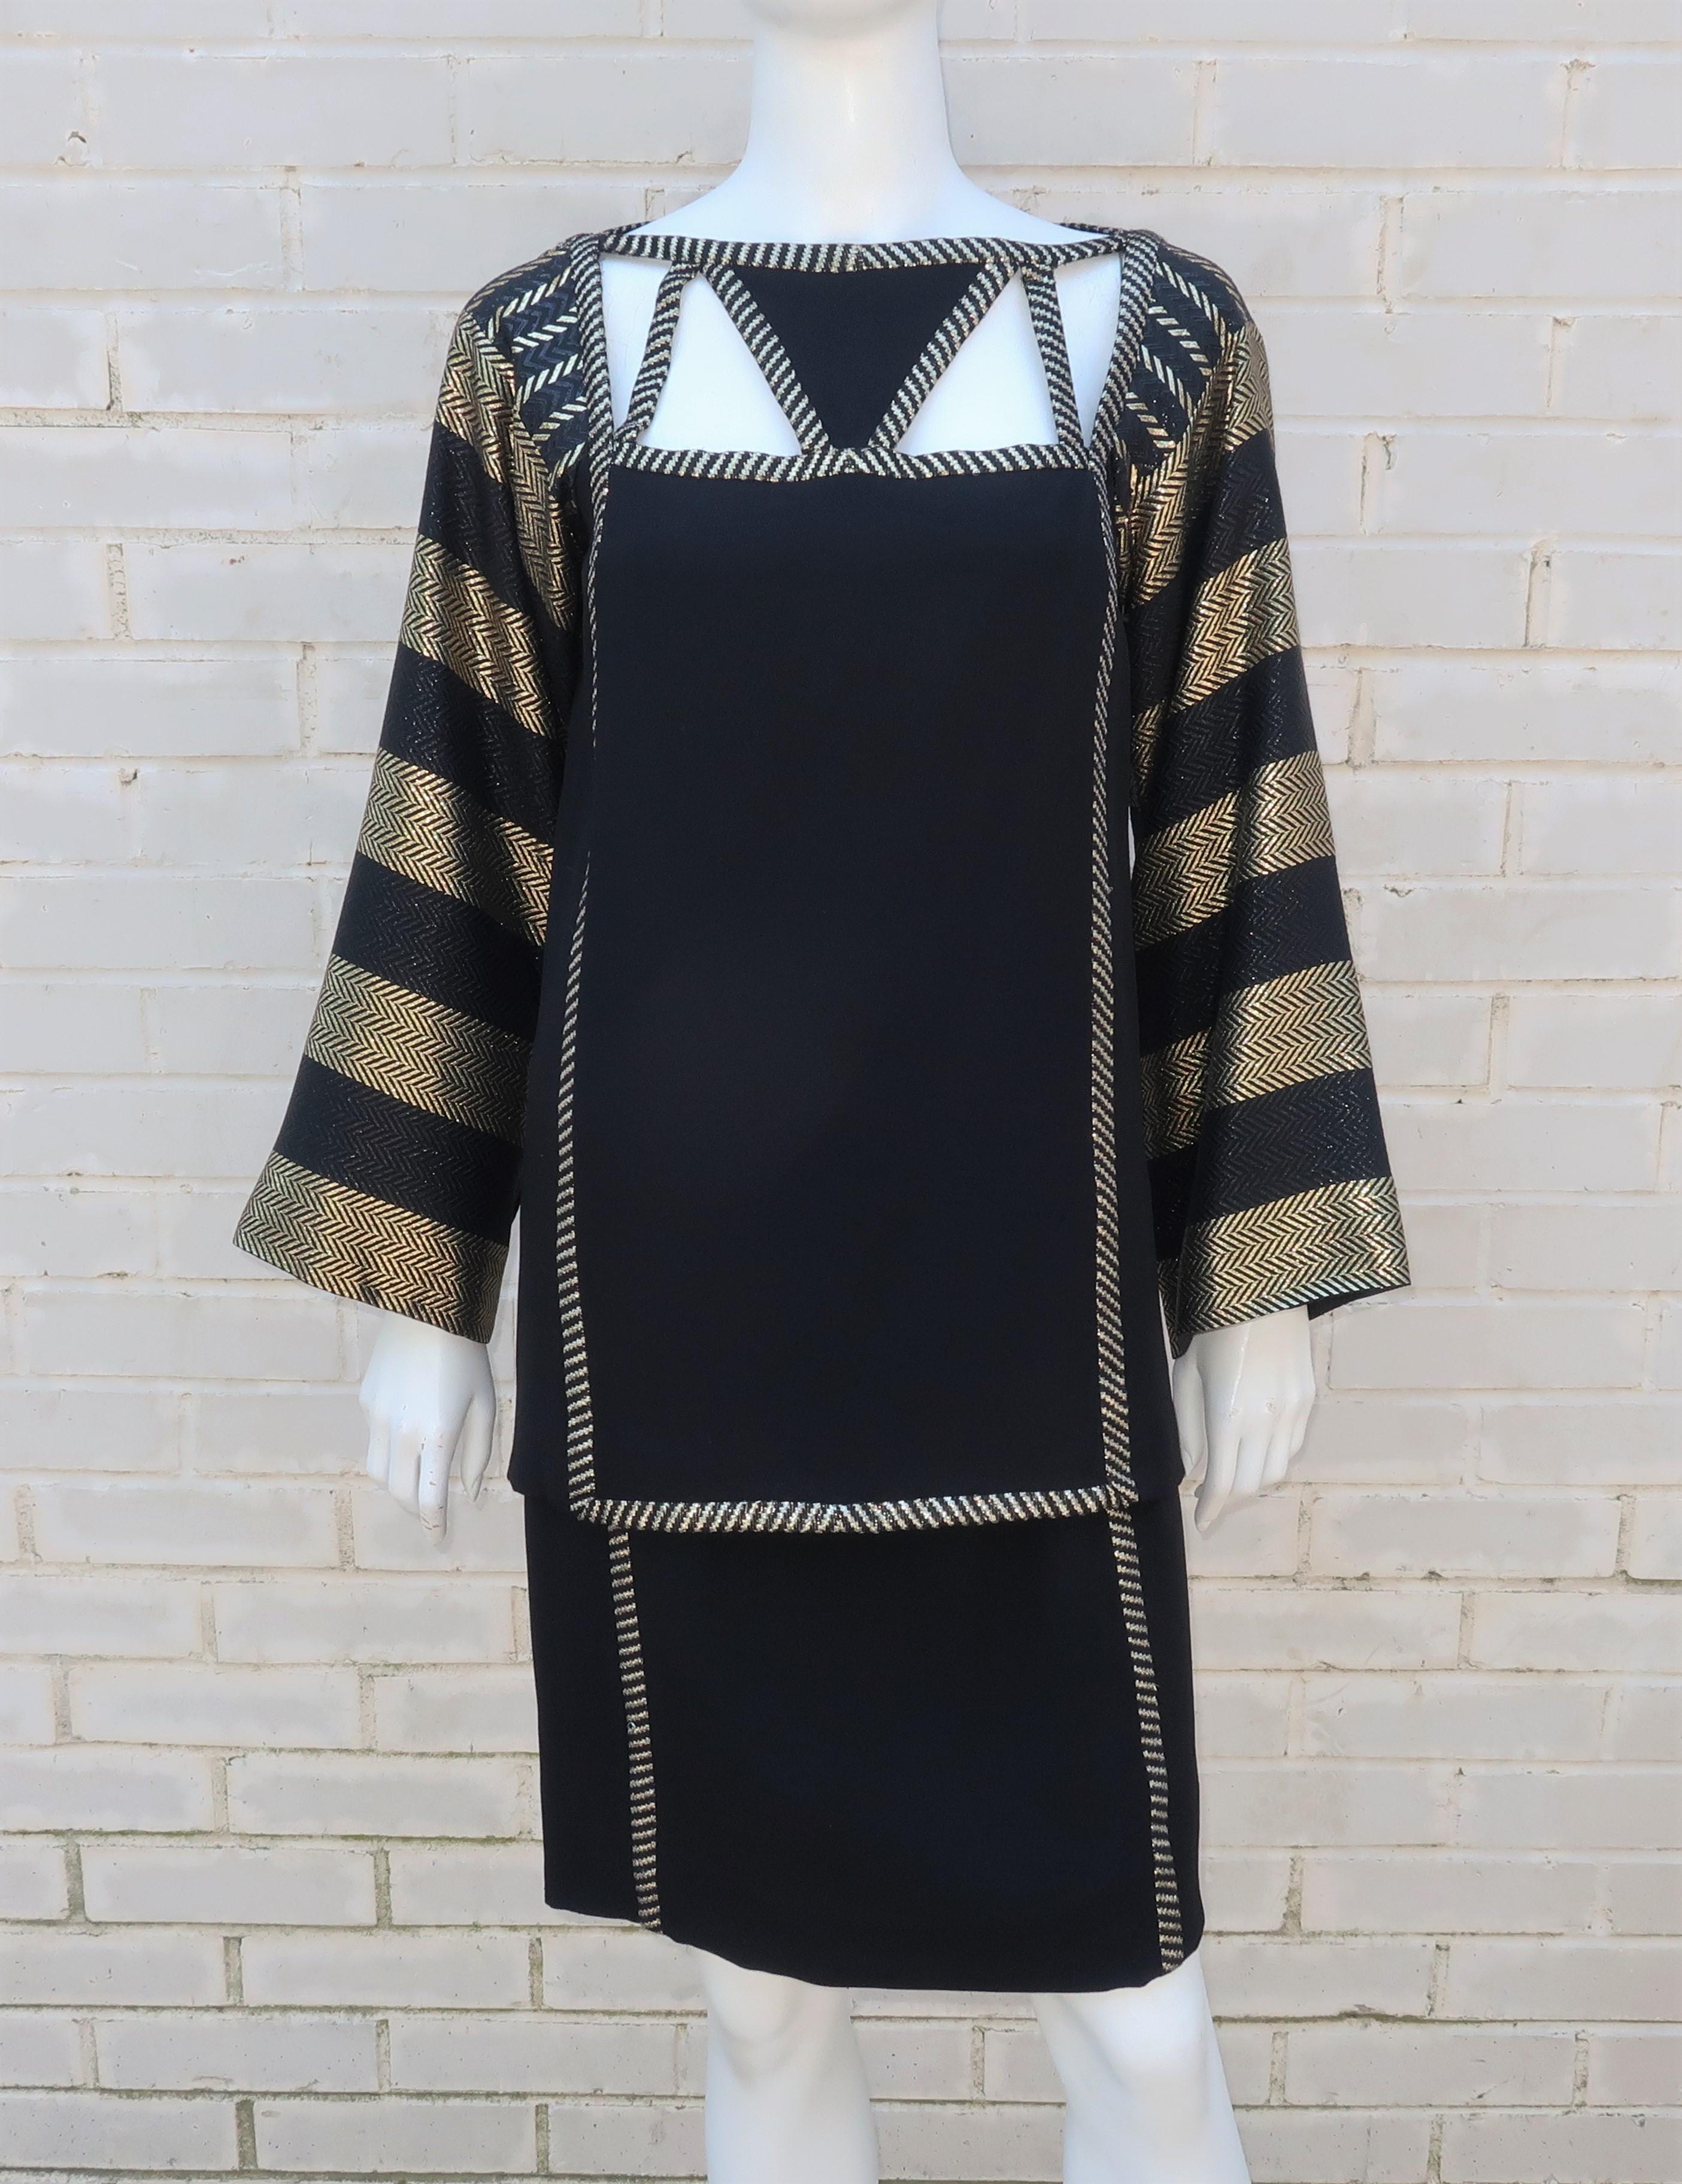 Famous for dressing fabulous divas in sequins, Bob Mackie proves with this 1970's Art Deco revival ensemble that he can dazzle without spangles and feathers.  The two piece black crepe dress consists of a tunic and skirt decorated with gold lamé